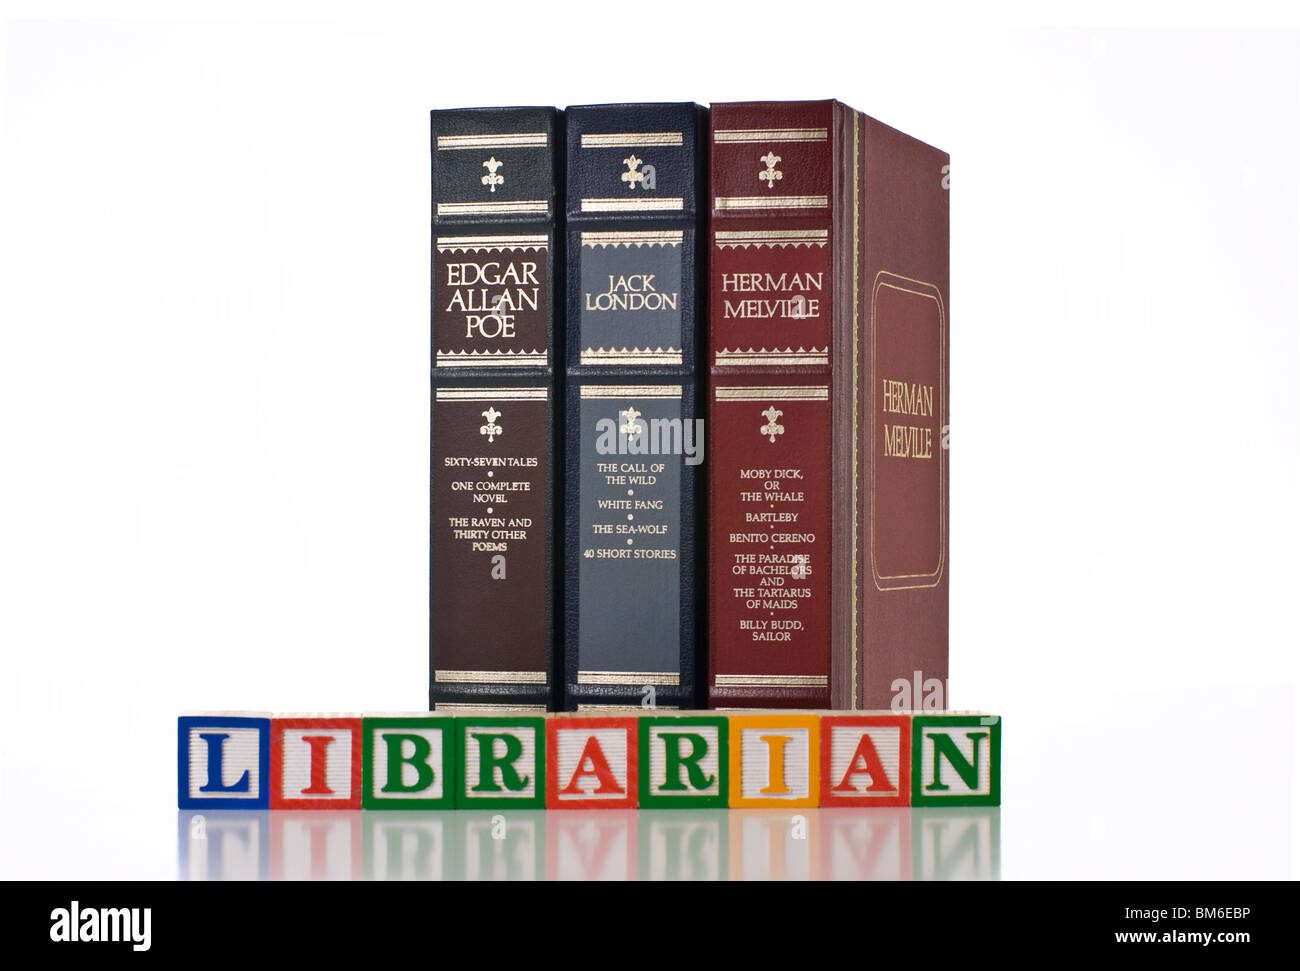 LIBRARIAN spelled using children's wooden blocks with books behind Stock Photo